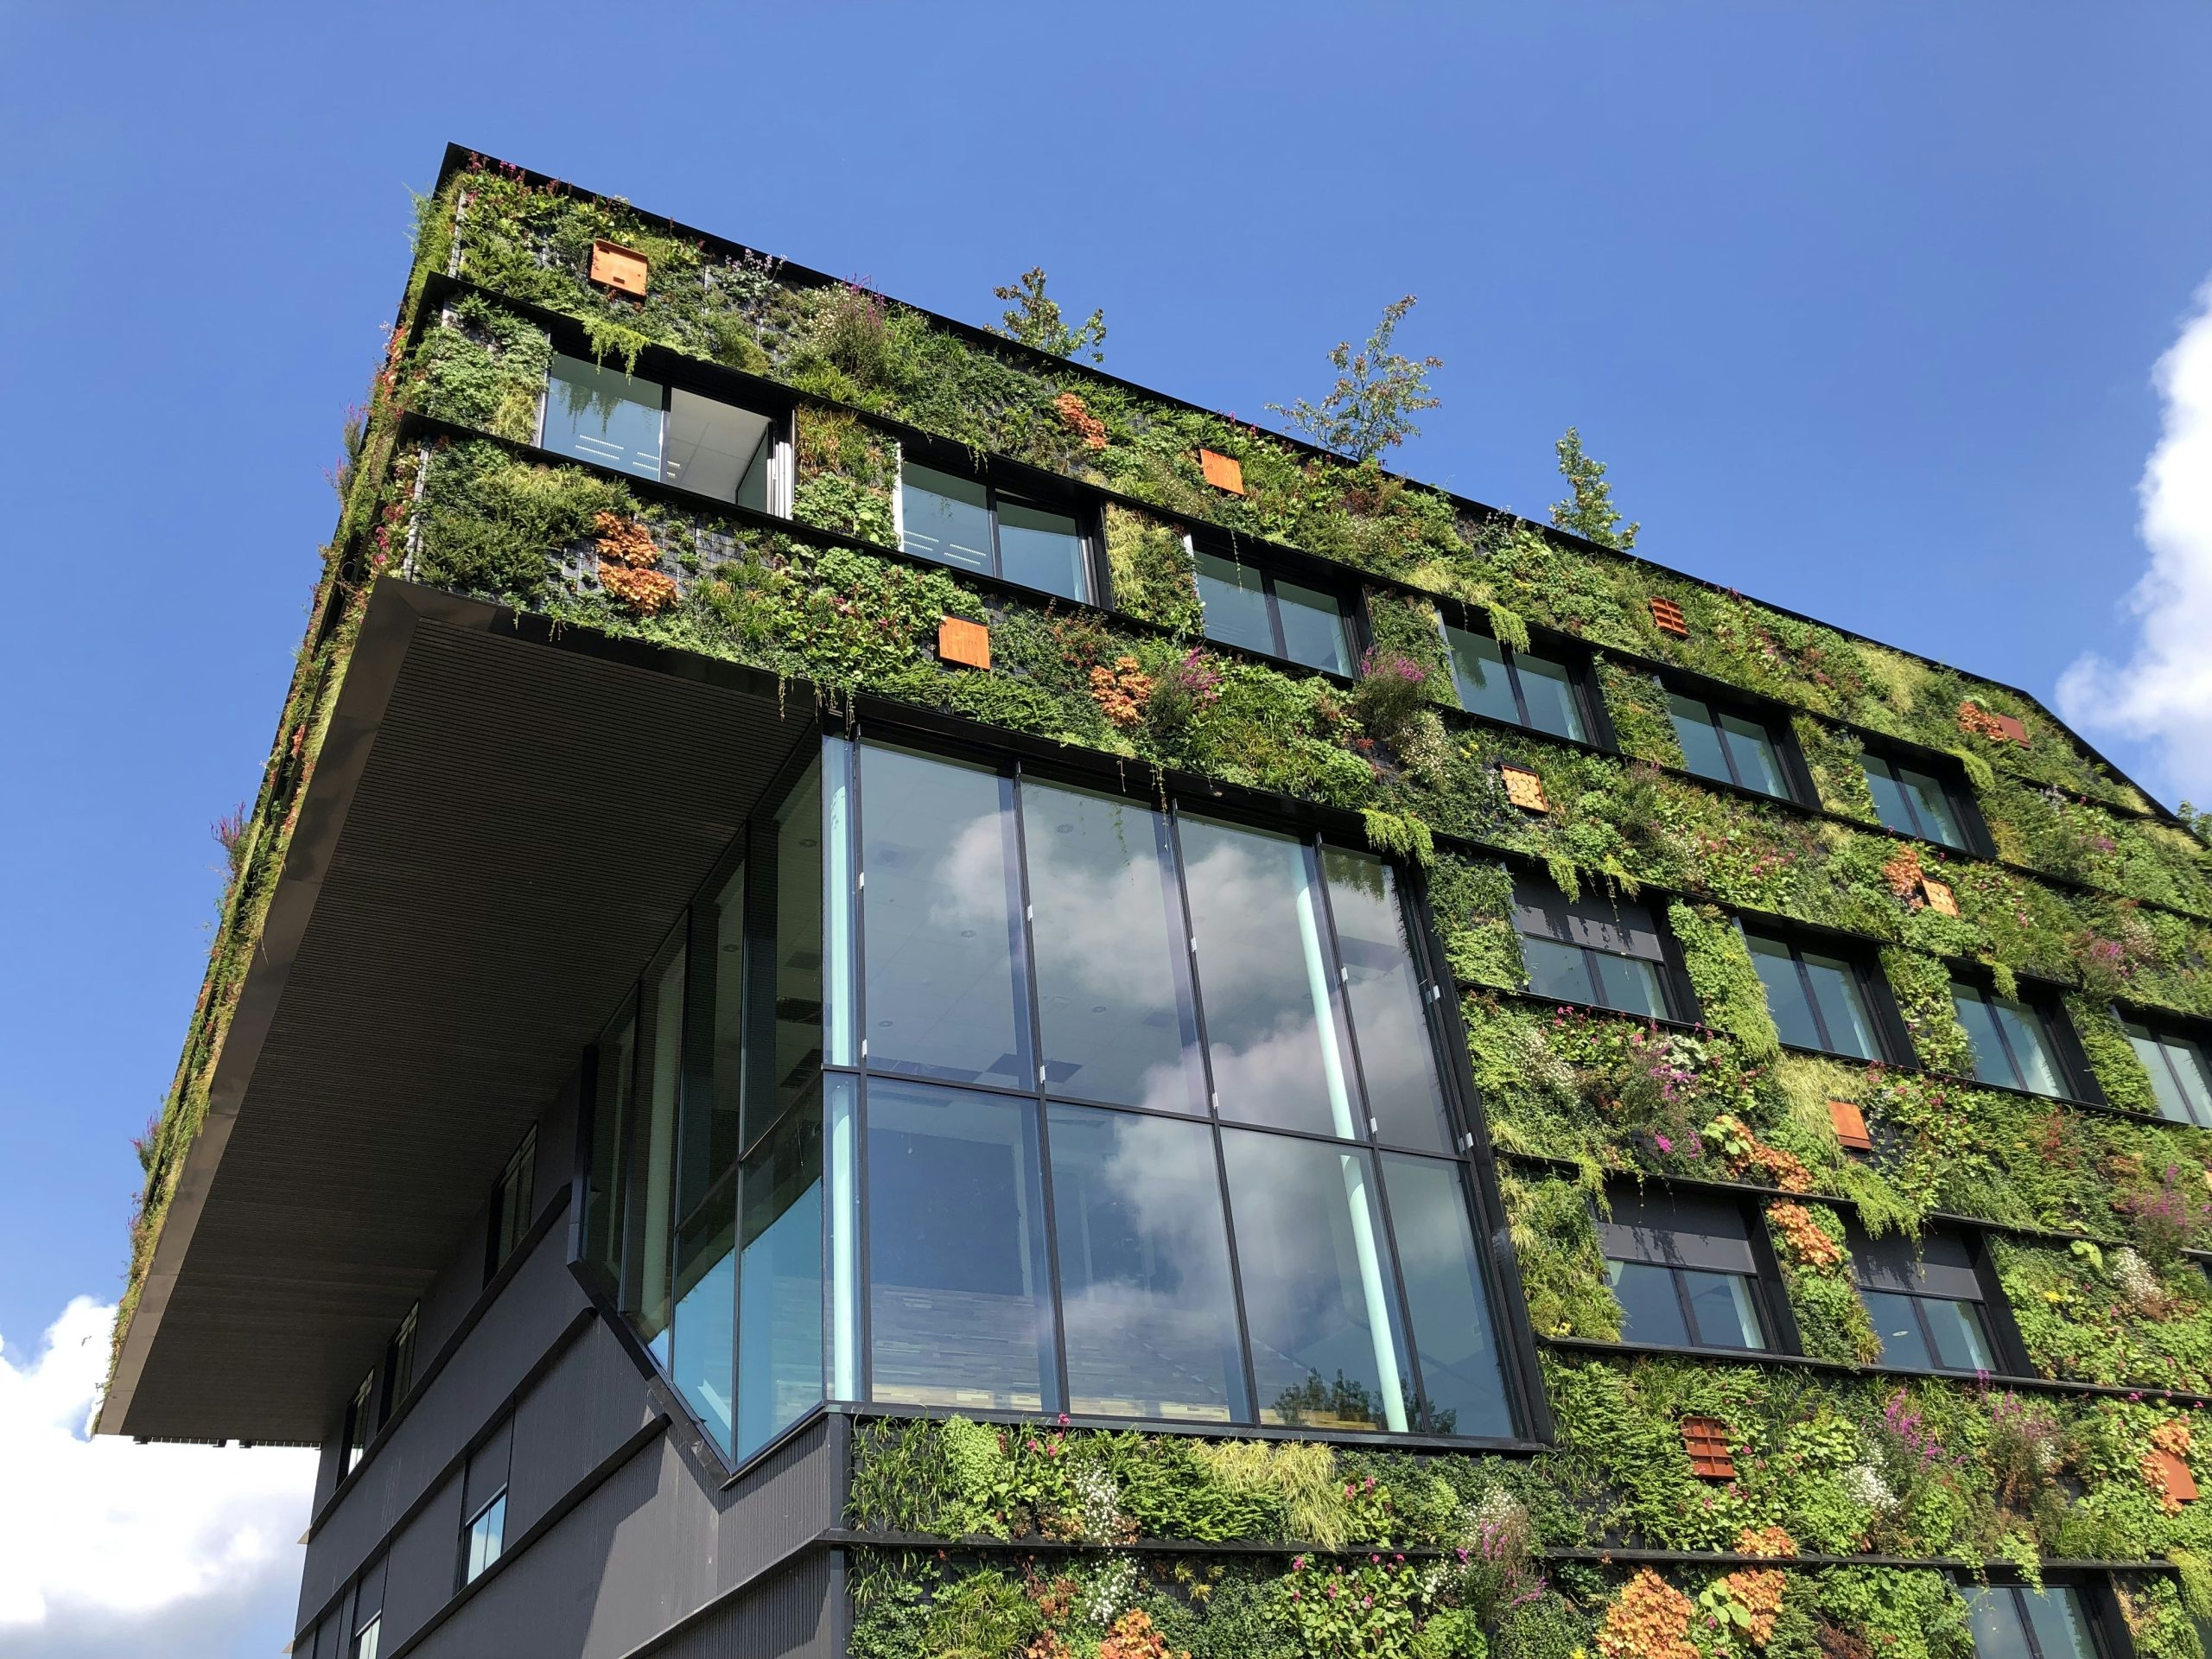 How Can Sustainable Architecture Reduce Operational Costs?